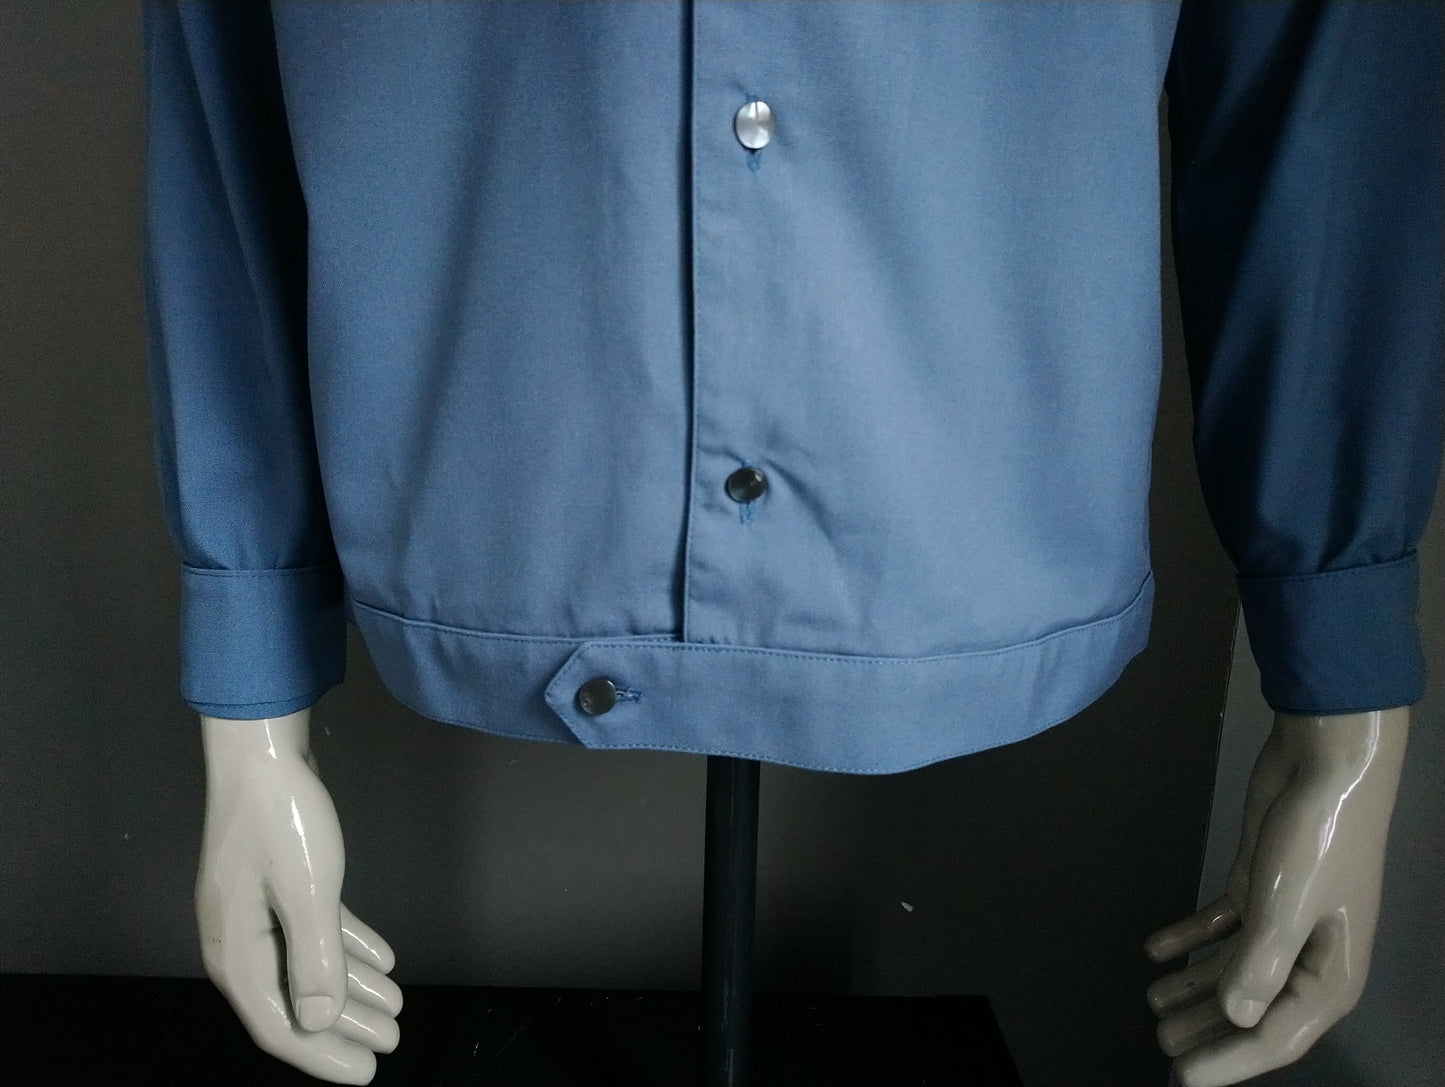 Vintage 70's shirt with point collar. Blue colored. Size L.